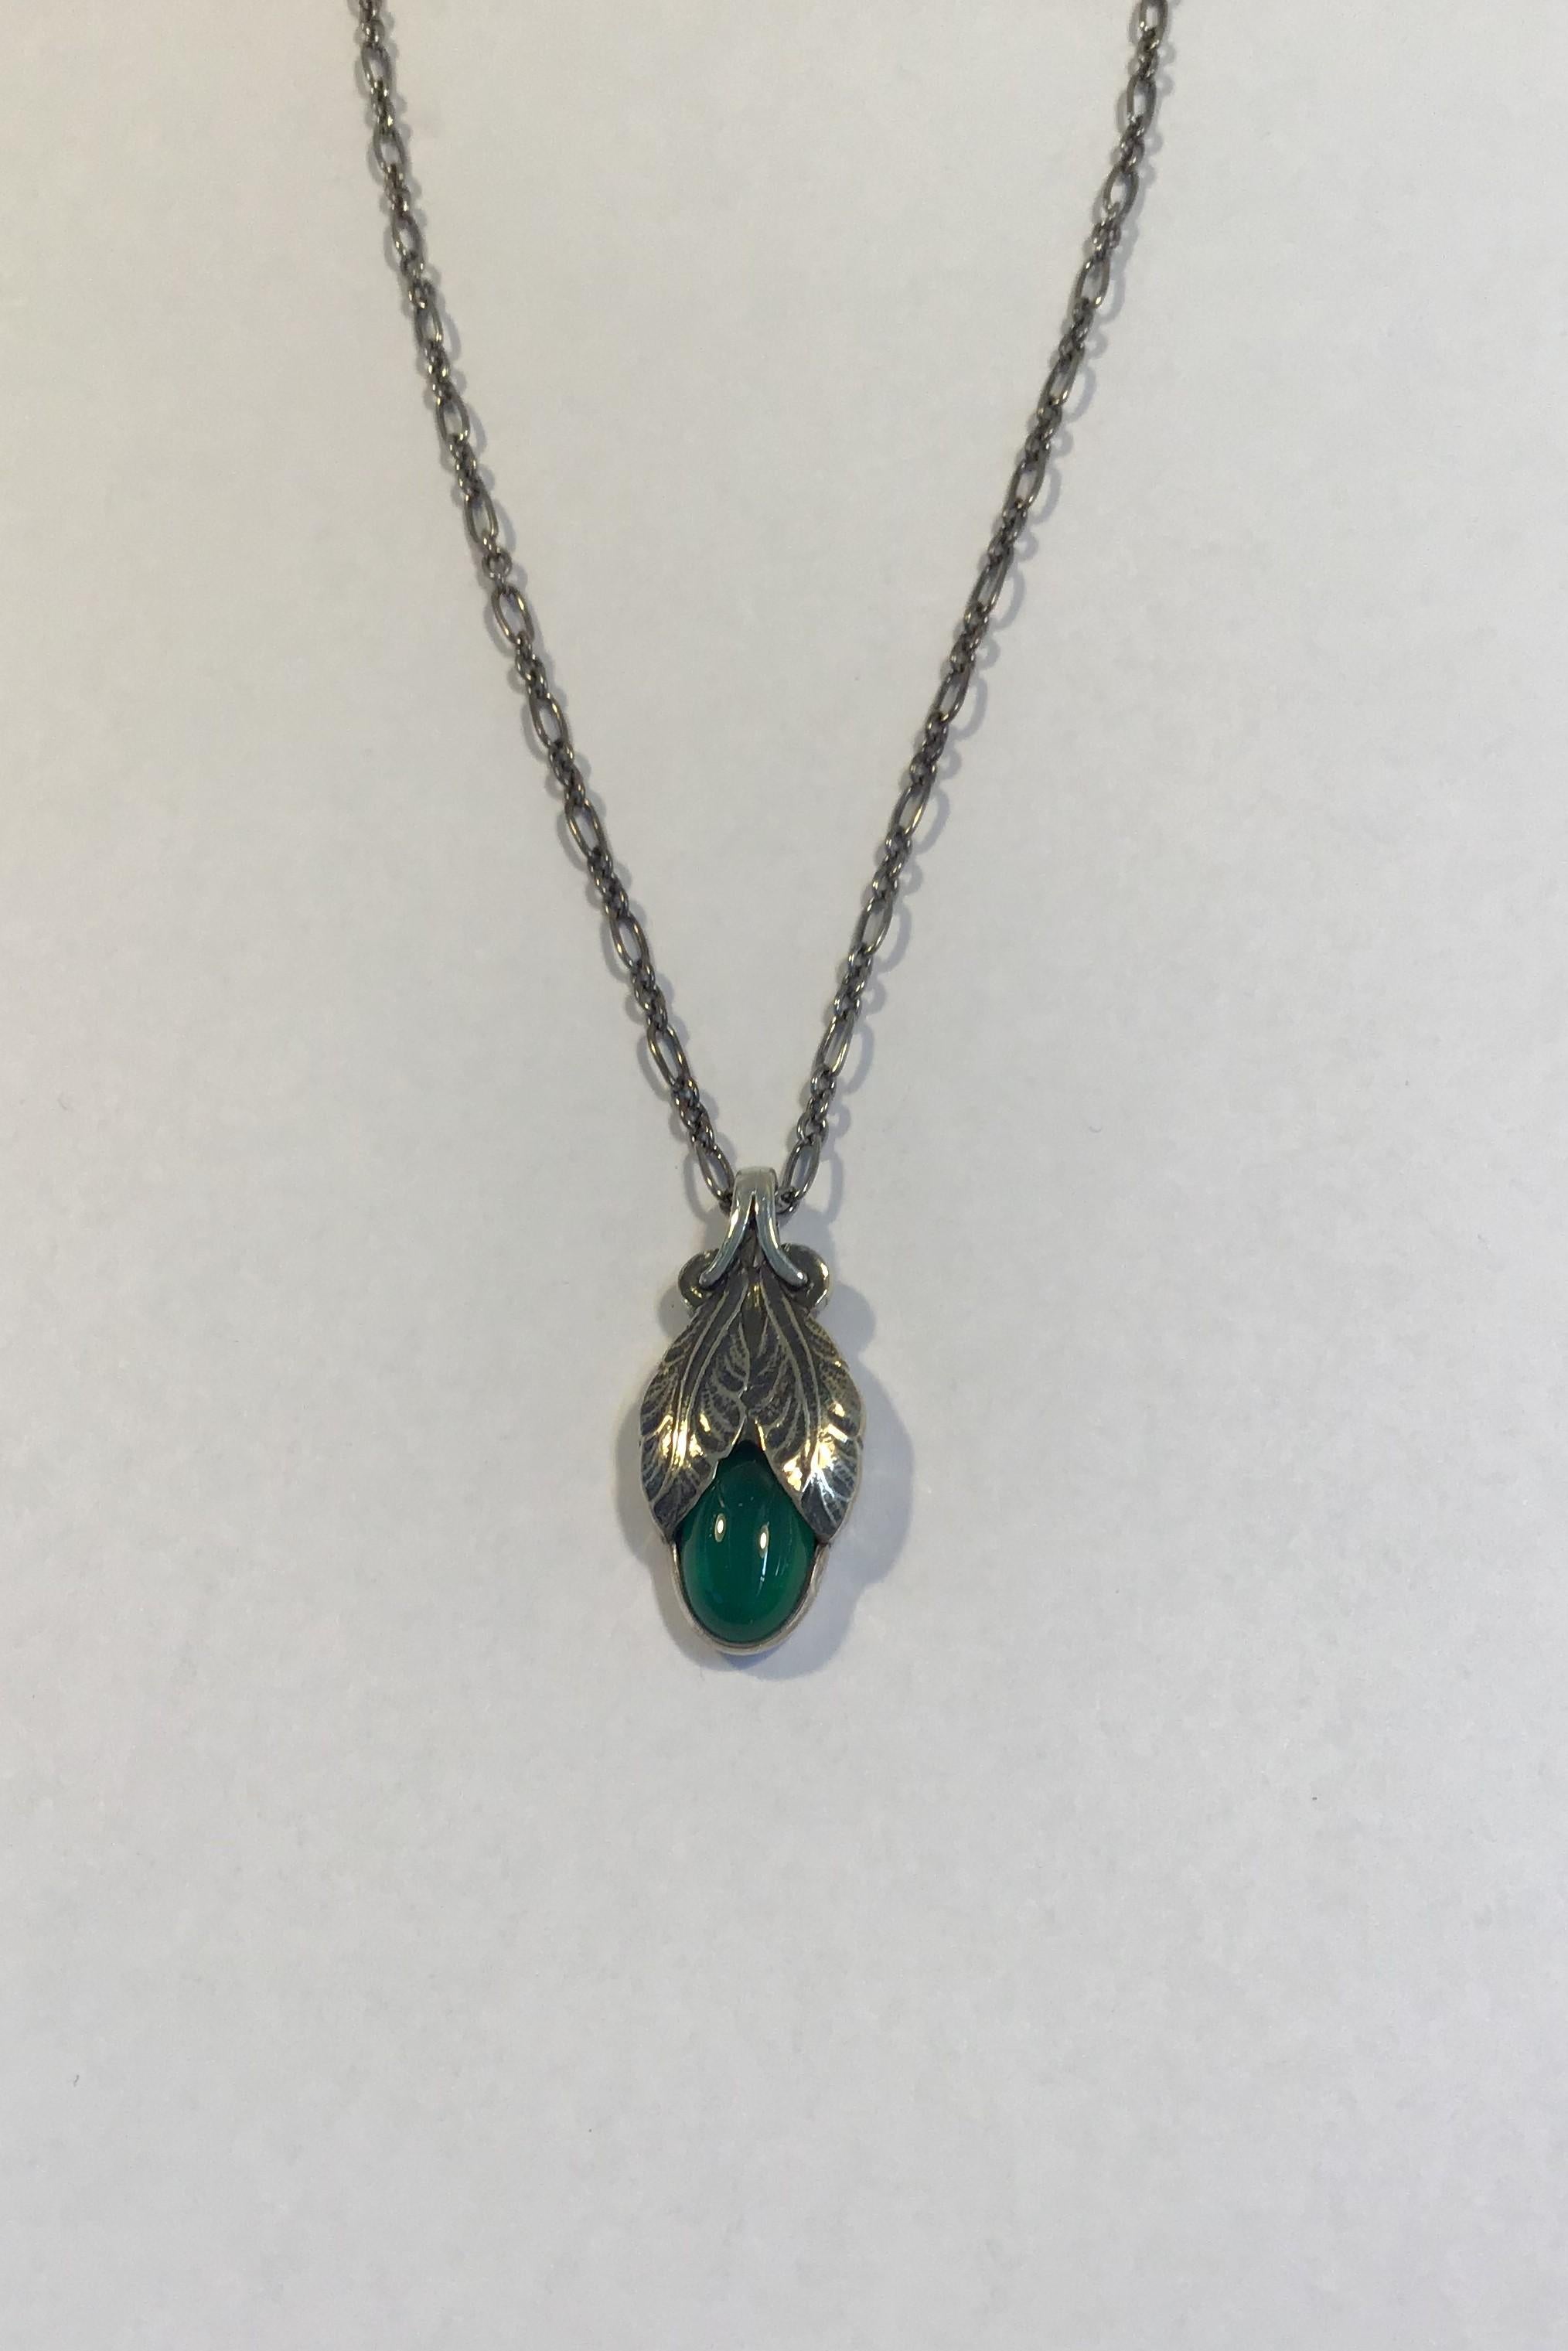 Georg Jensen Sterling Silver 2008 Annual Pendant (Green Agate) with Necklace L 44 cm (17.33 in) Weight 14.3 gr (0.52 oz)